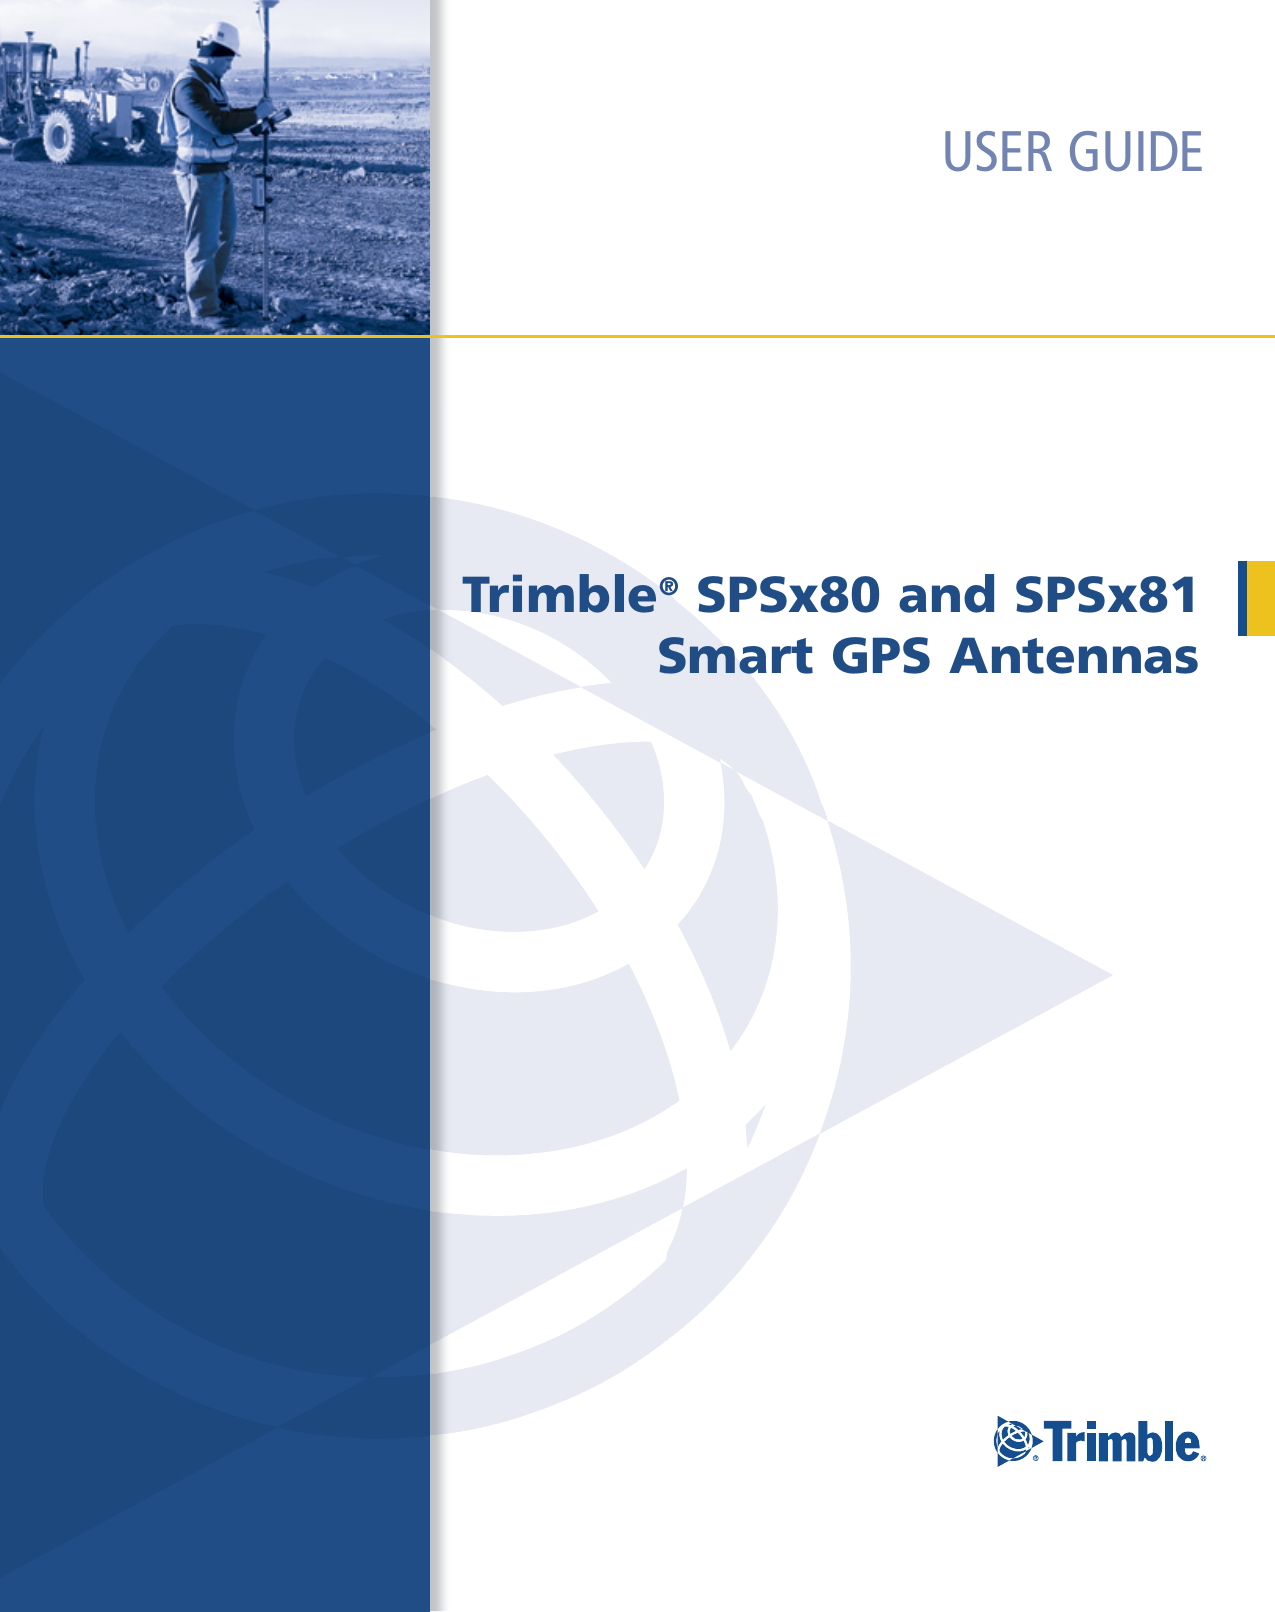 Trimble® SPSx80 and SPSx81 Smart GPS Antennas USER GUIDE